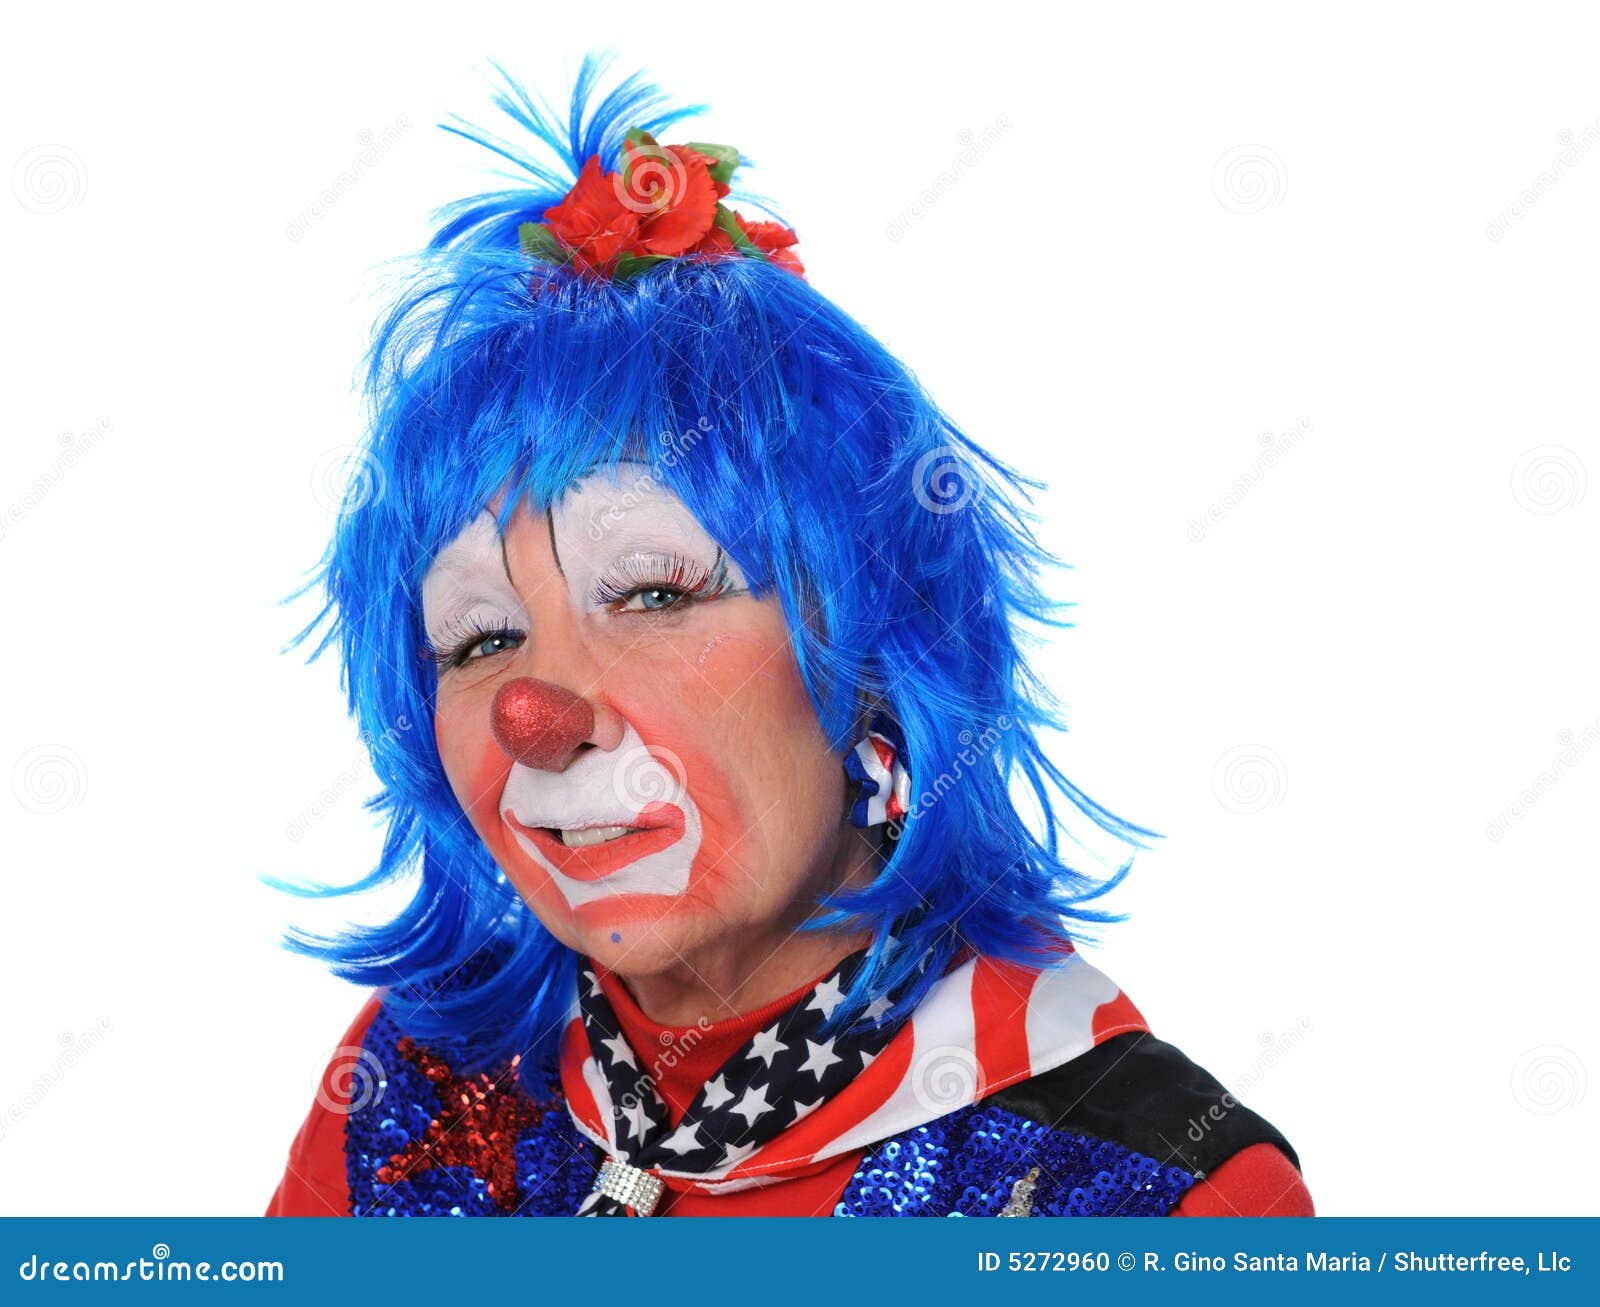 Clown with blue hair and a big smile - wide 8